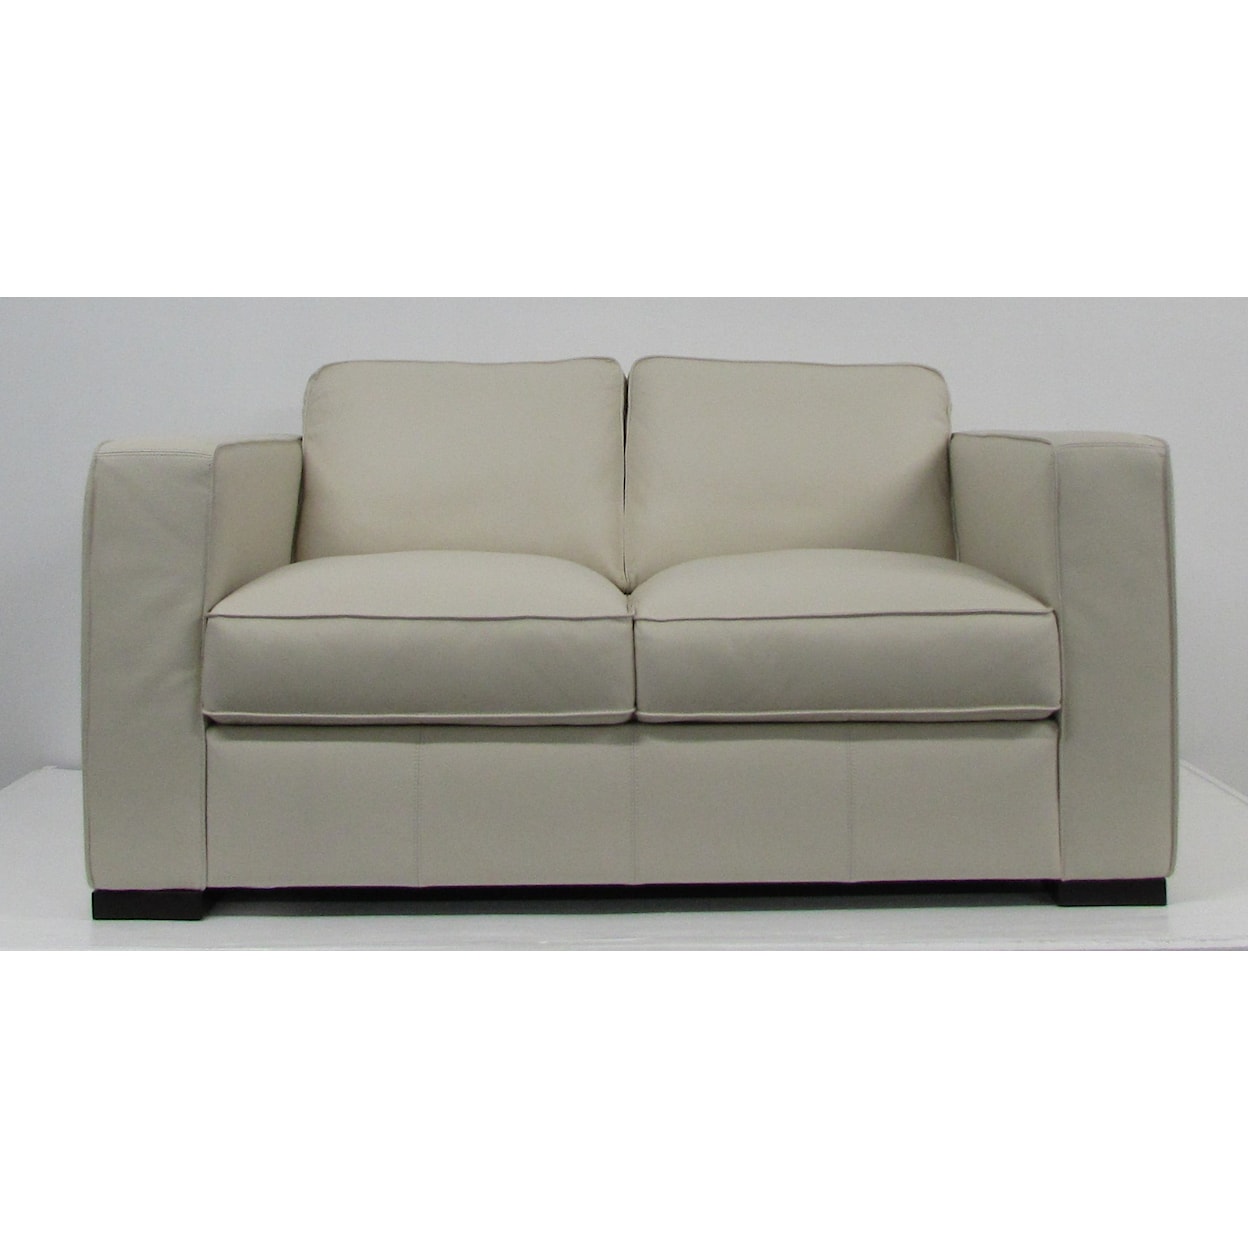 Natuzzi Editions C274 Leather Collection Ivory Leather Loveseat